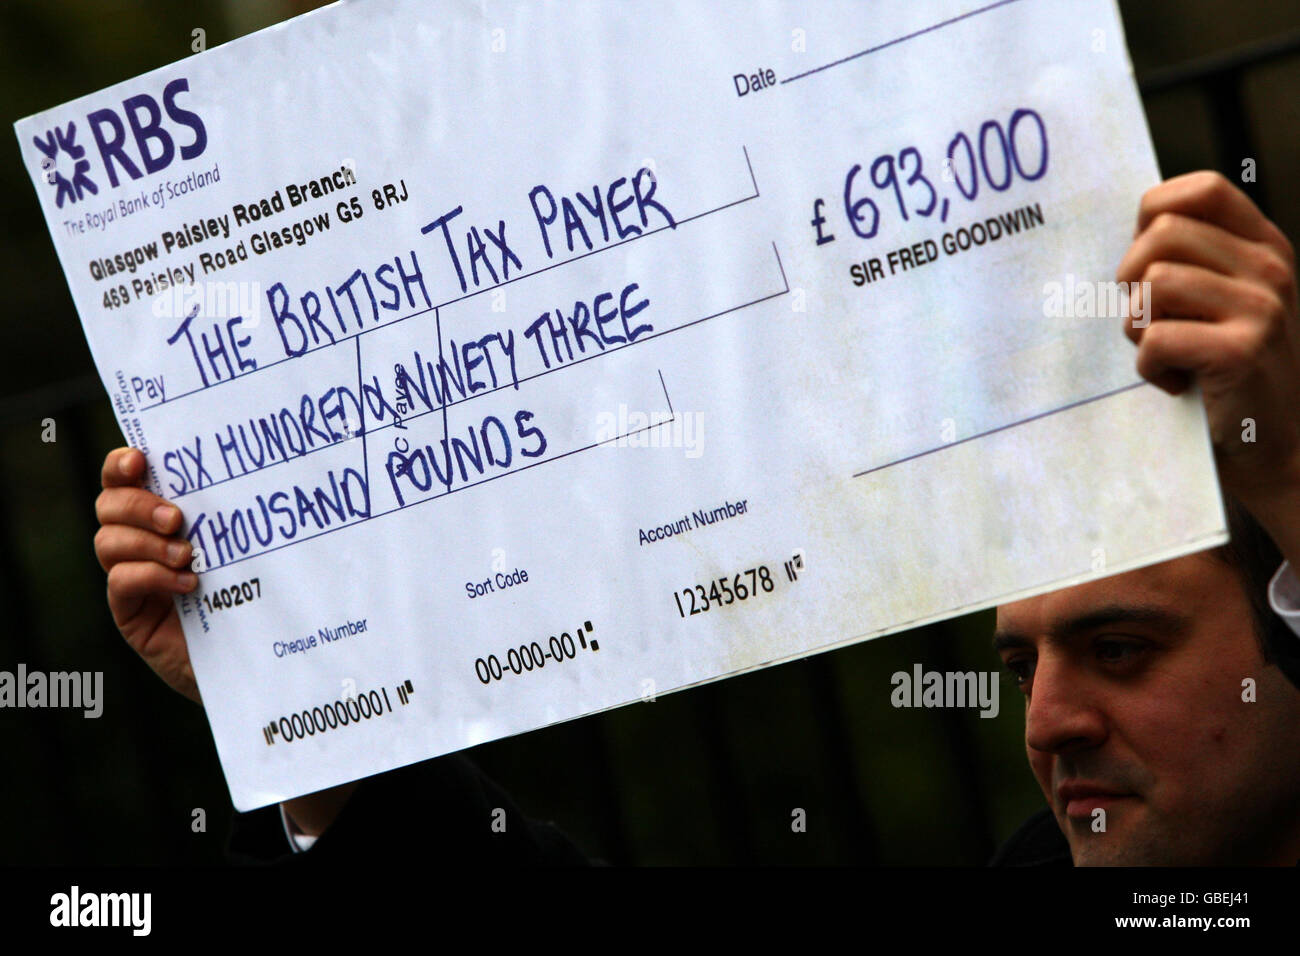 A national newspaper journalist holds a fake check outside the Edinburgh home of Sir Fred Goodwin today. Gordon Brown today voiced his 'anger' over the 693,000-a-year pension awarded to the former boss of Royal Bank of Scotland Sir Fred Goodwin, which the Prime Minister described as 'unjustifiable and unacceptable'. Stock Photo